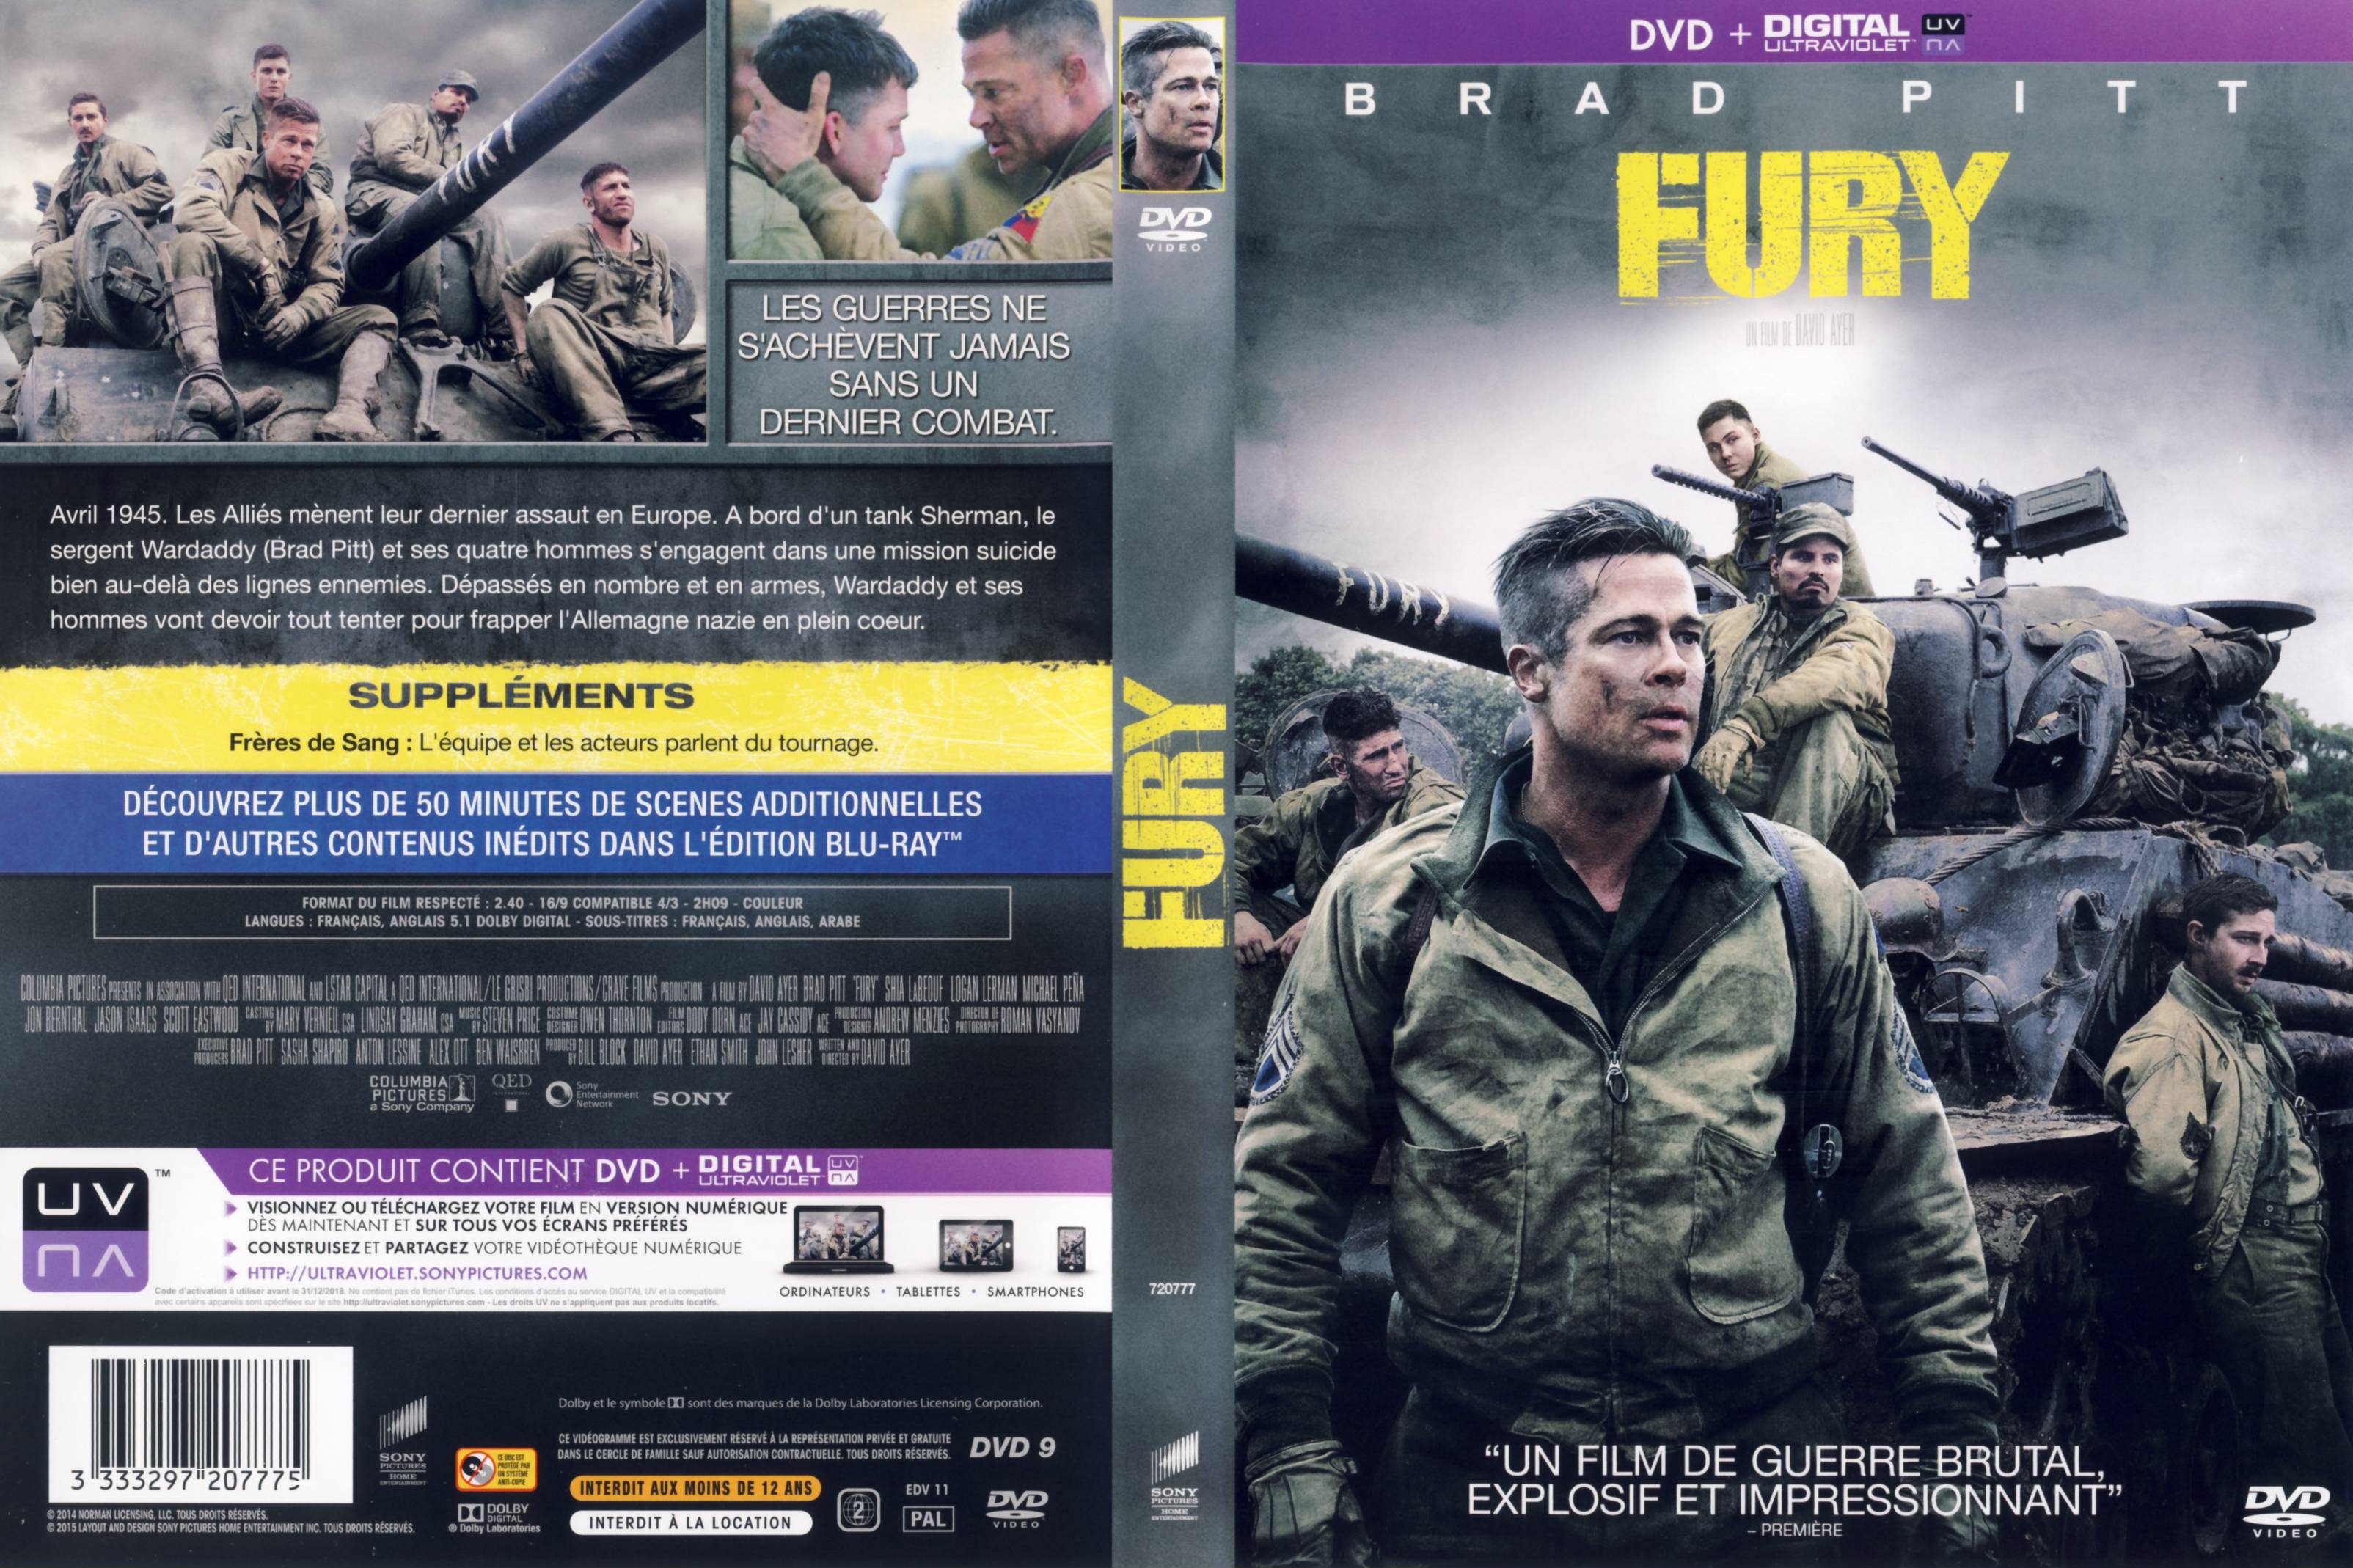 Jaquette DVD Fury